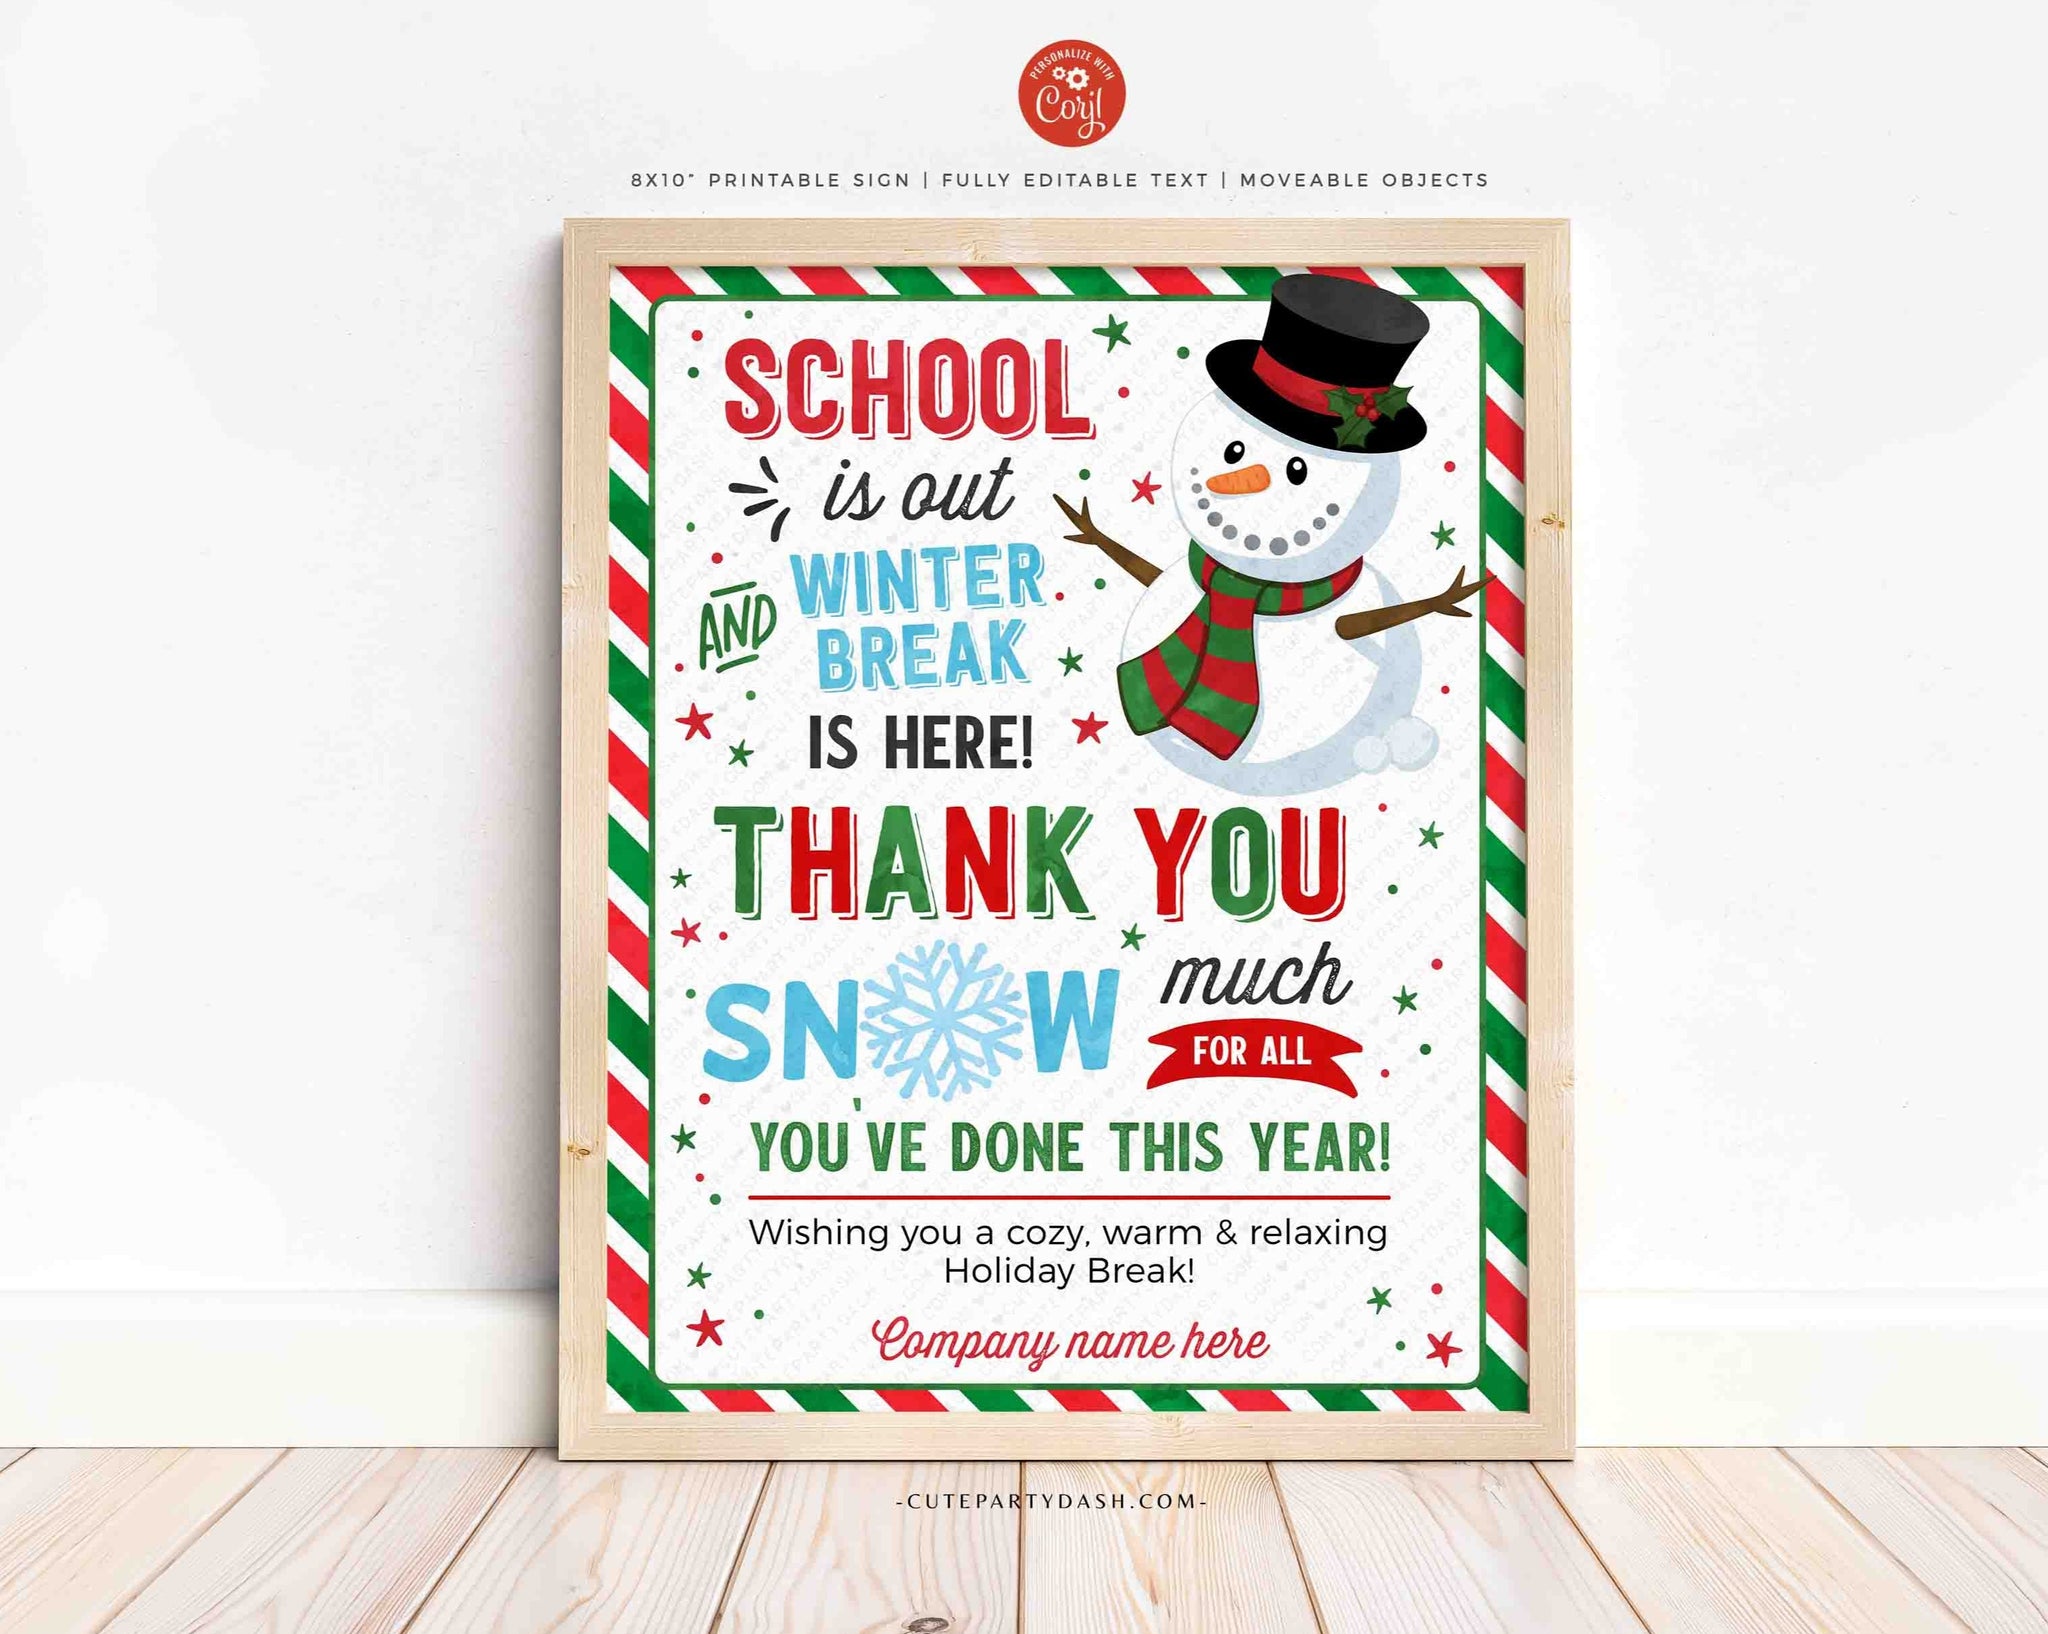 School's Out Winter Break Christmas Sign INSTANT DOWNLOAD Thank you snow much End of the year Teacher School Editable Merry Christmas tag